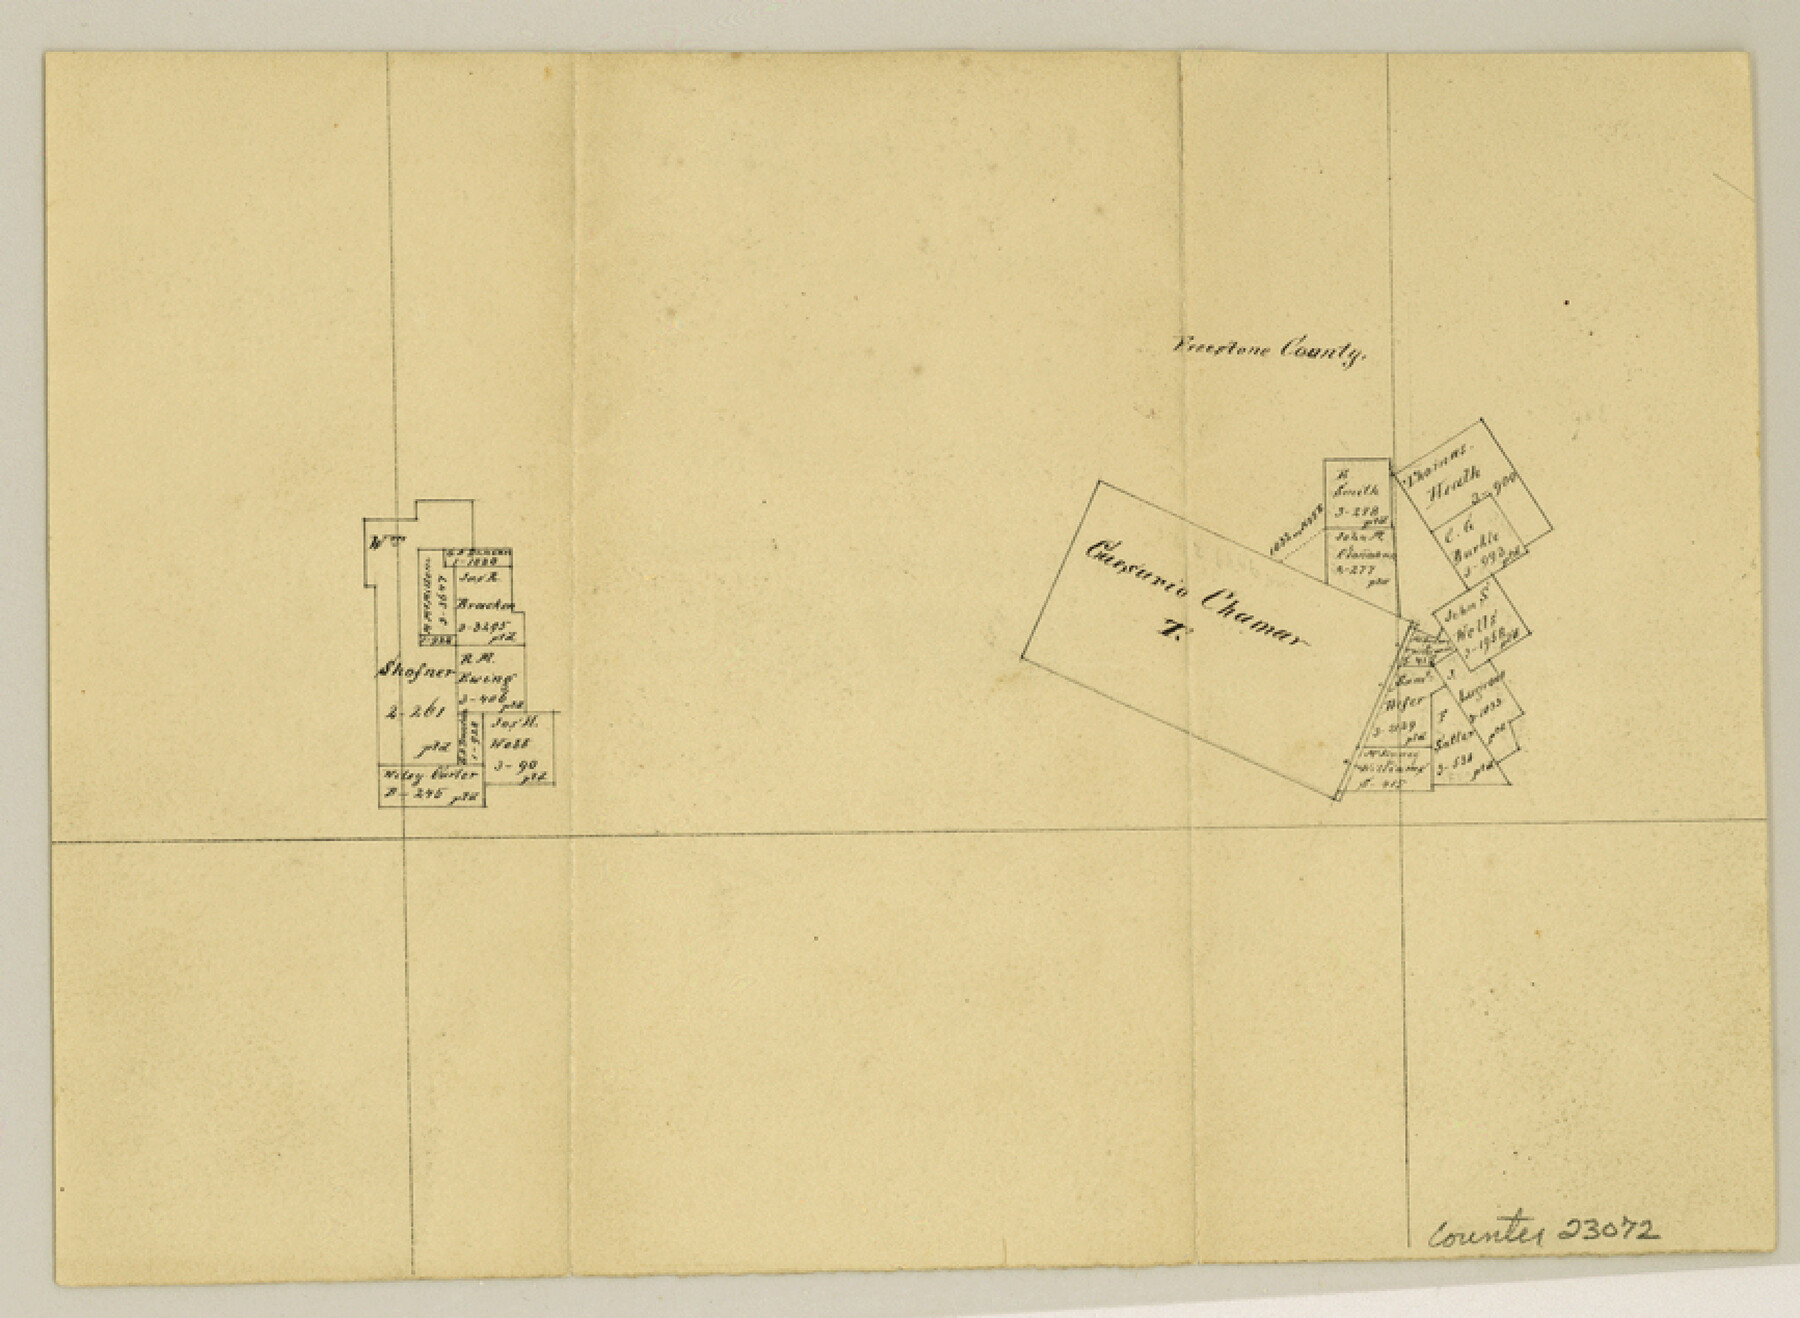 23072, Freestone County Sketch File 16, General Map Collection